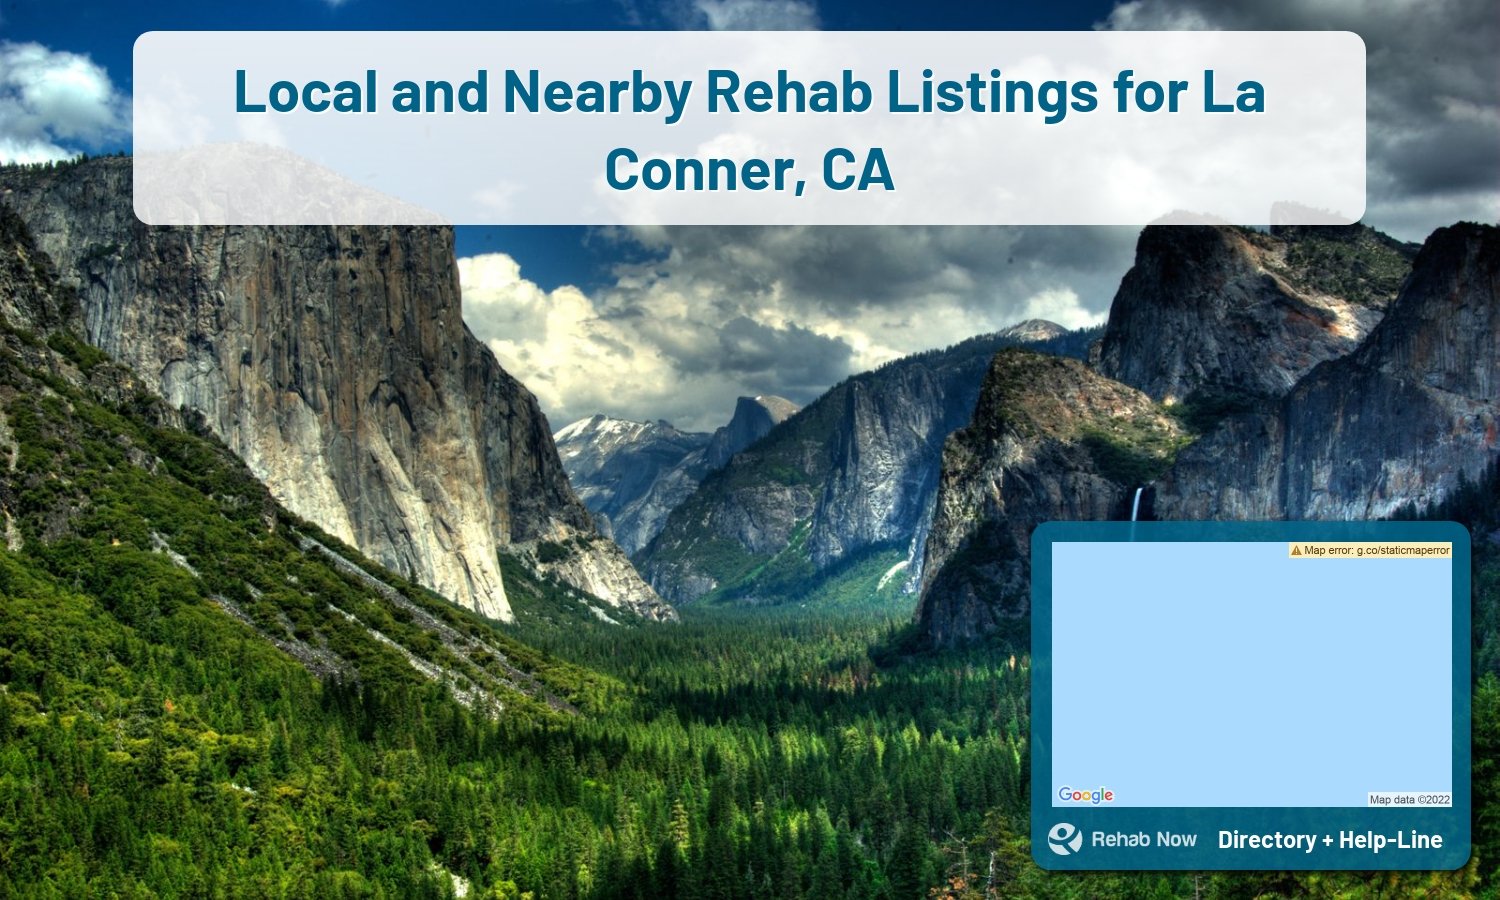 View options, availability, treatment methods, and more, for drug rehab and alcohol treatment in La Conner, California